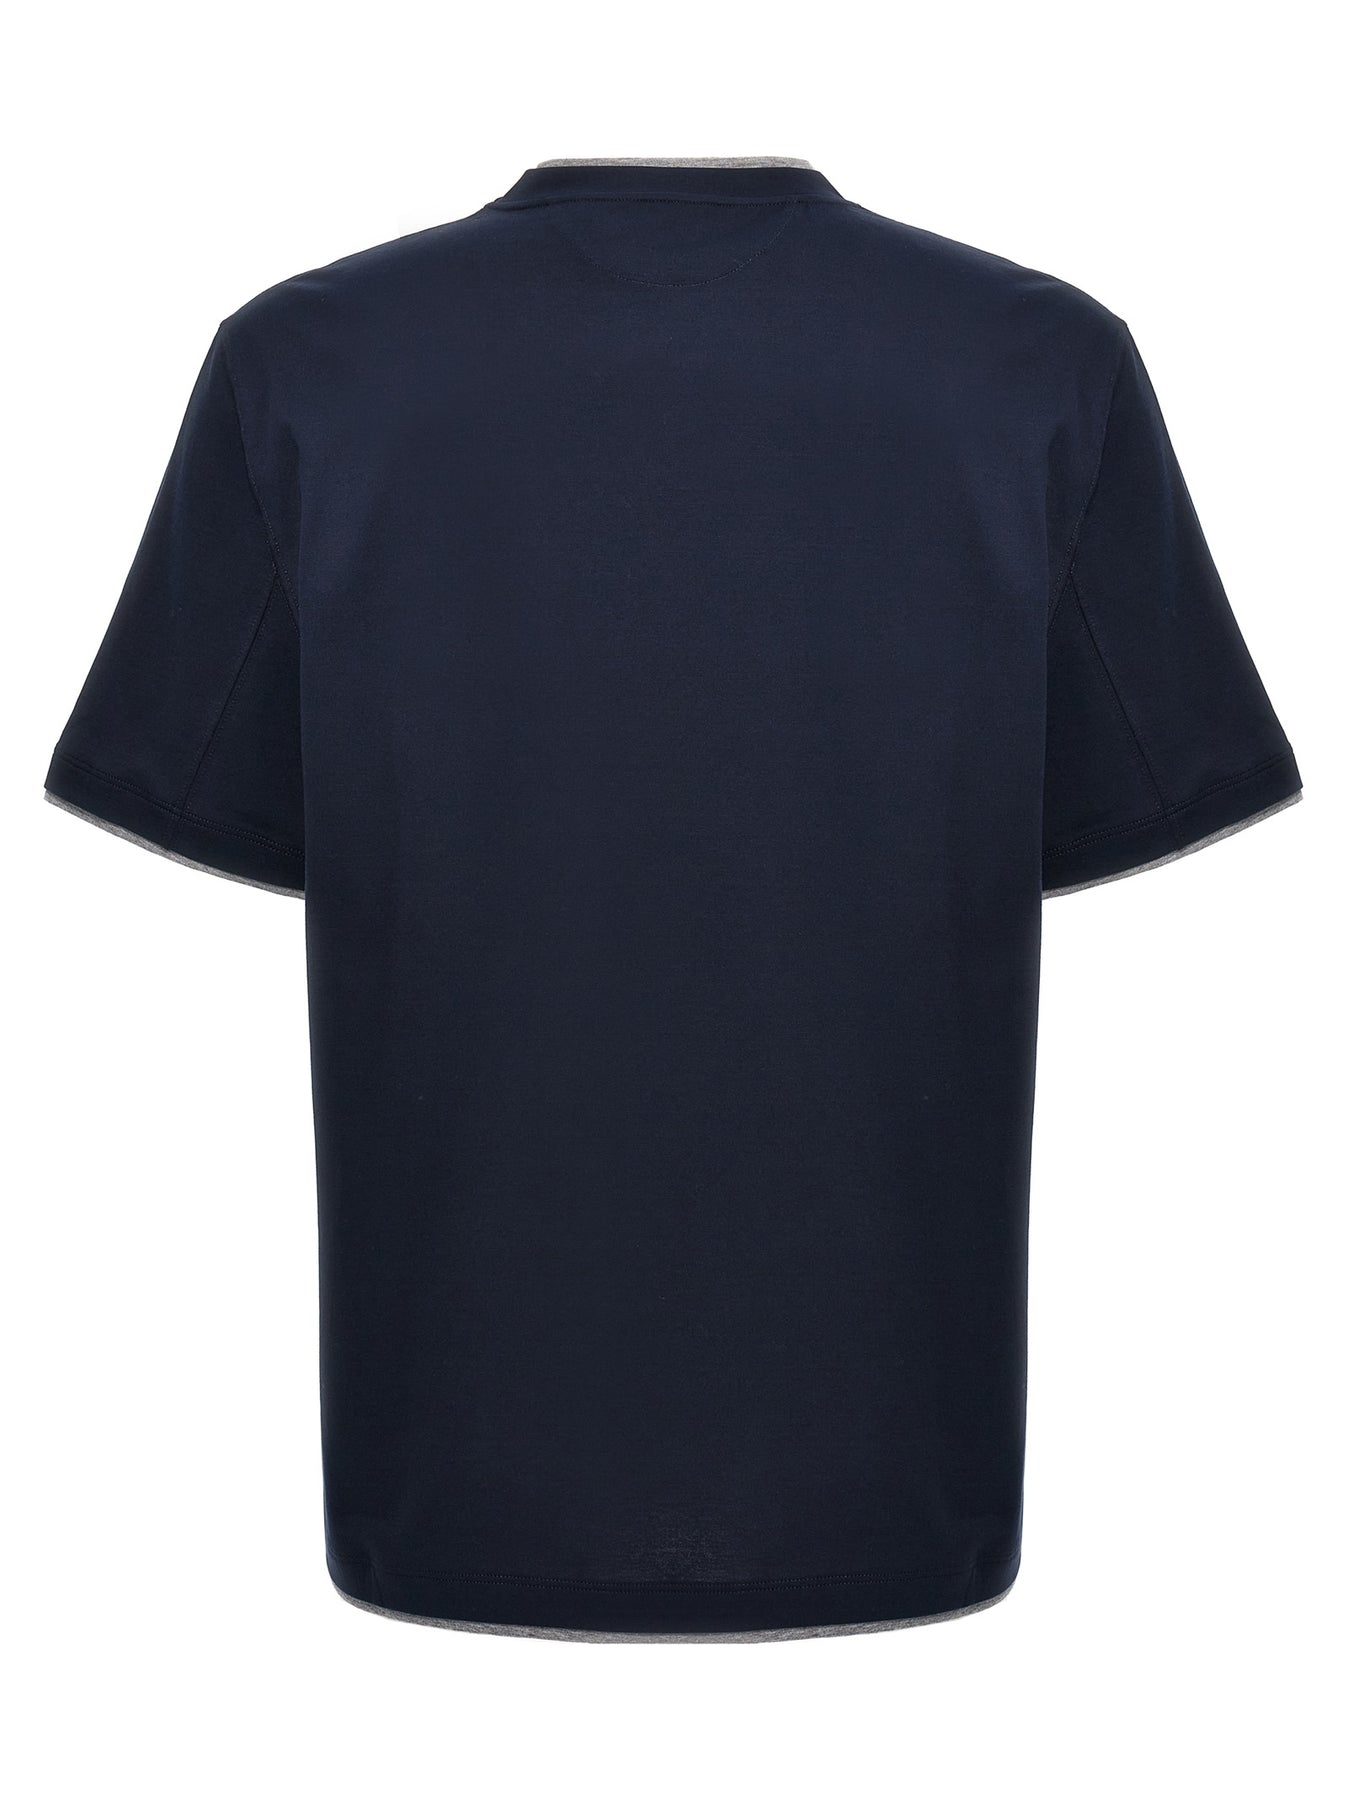 Double Layer T-Shirt Blue - 2